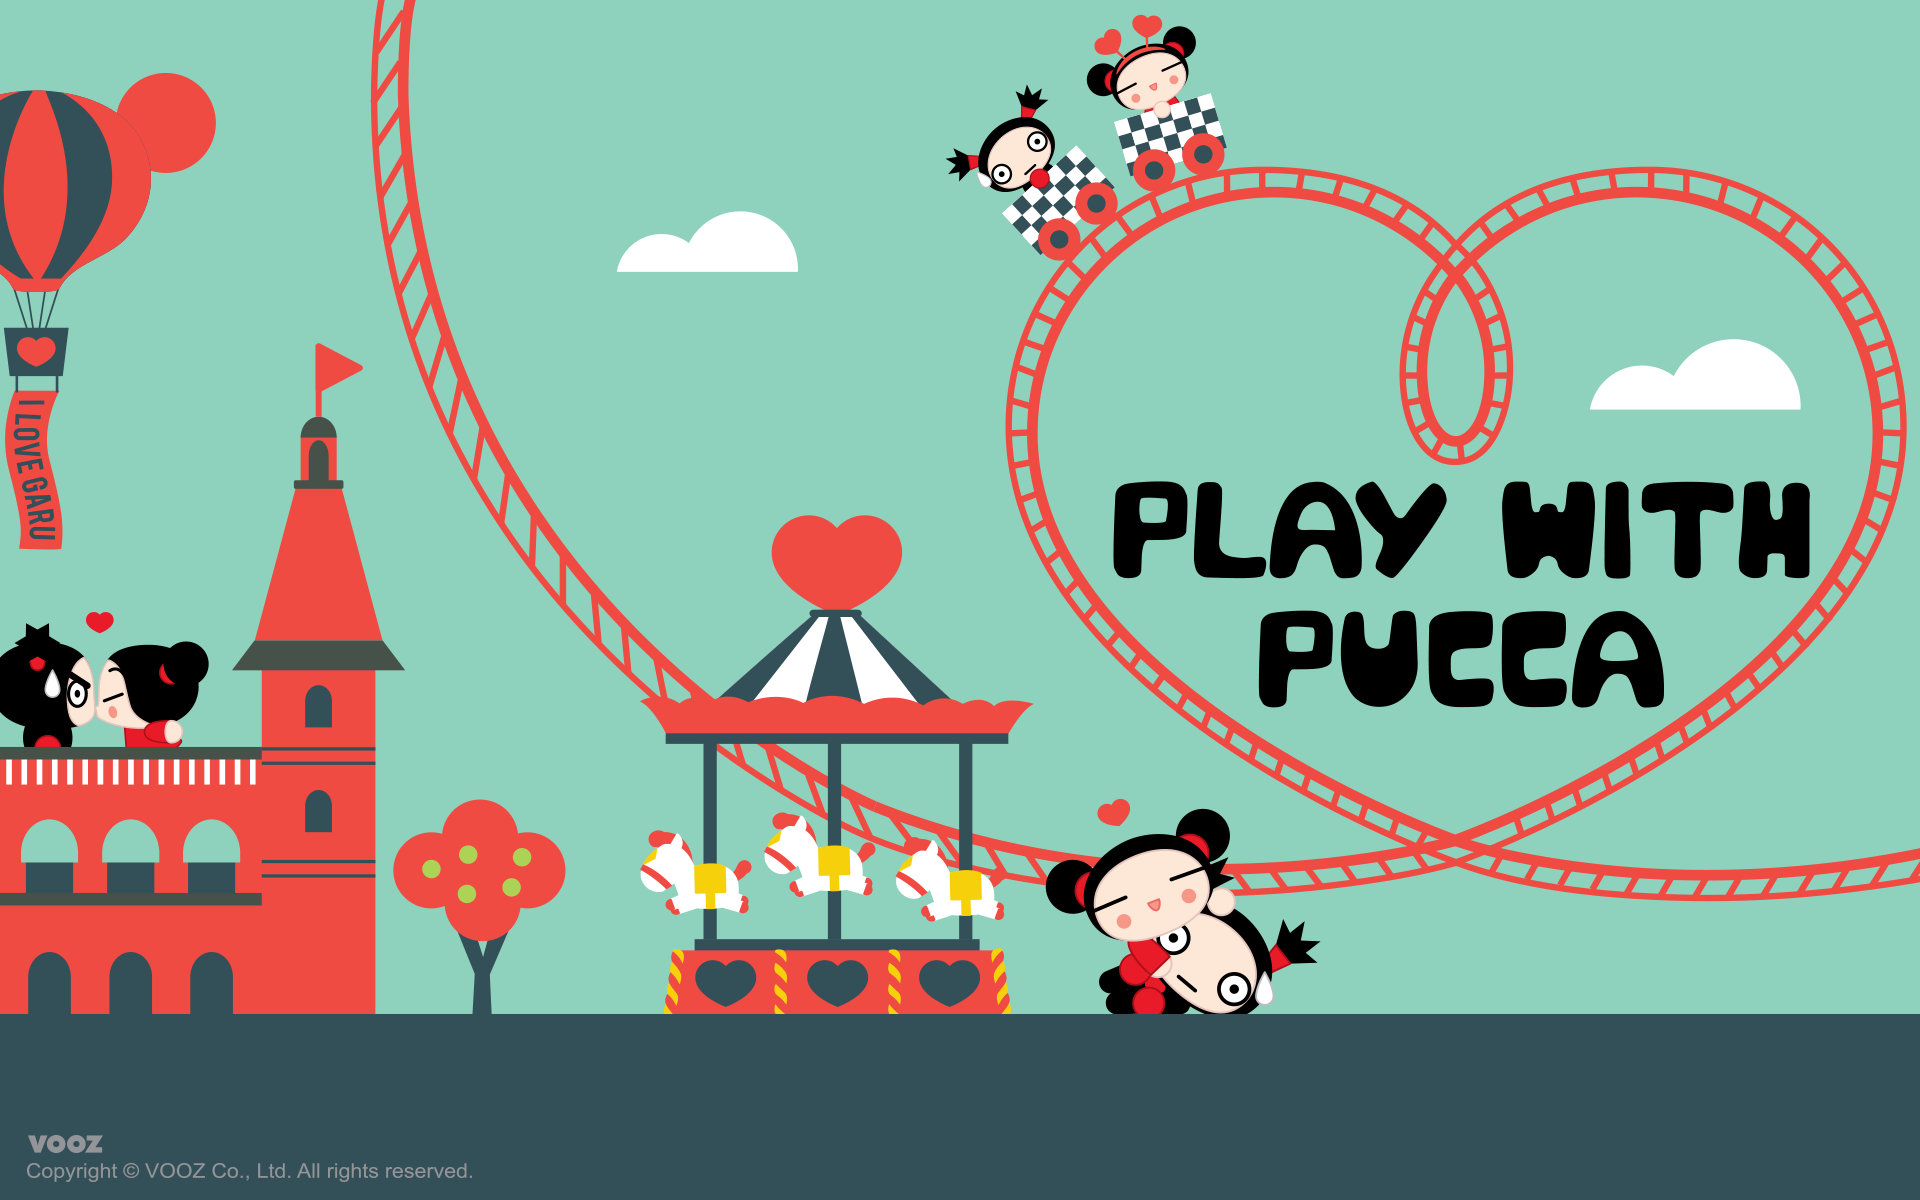 Play with Pucca